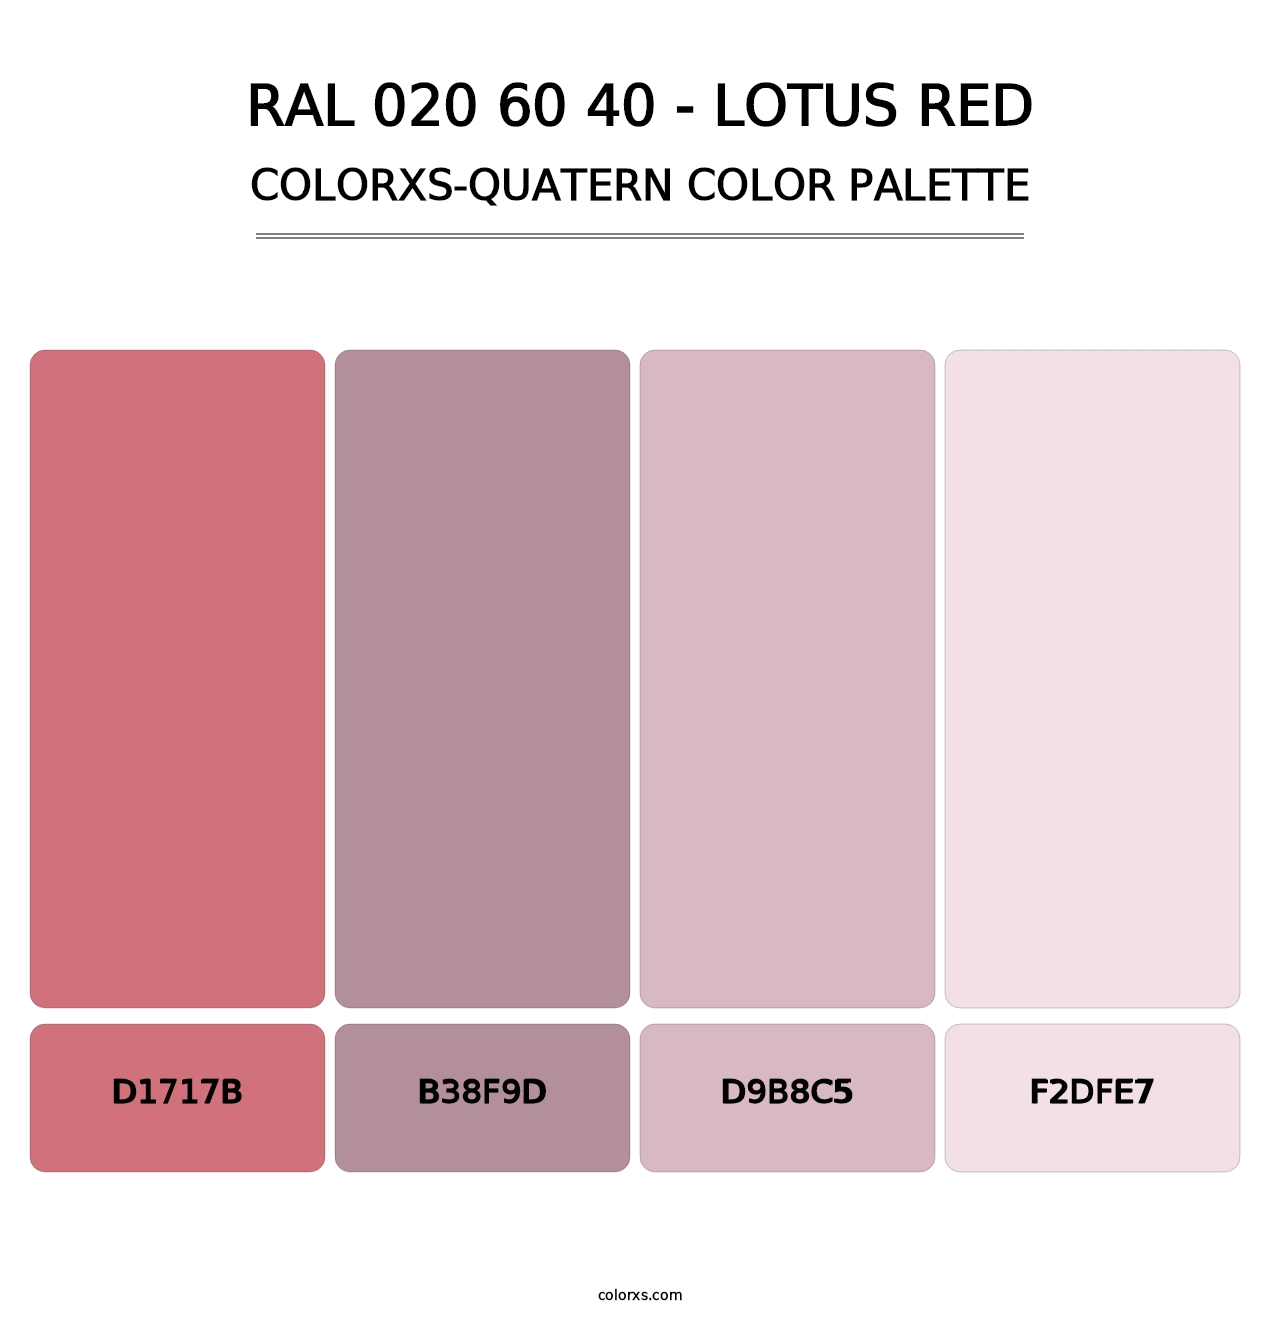 RAL 020 60 40 - Lotus Red - Colorxs Quatern Palette